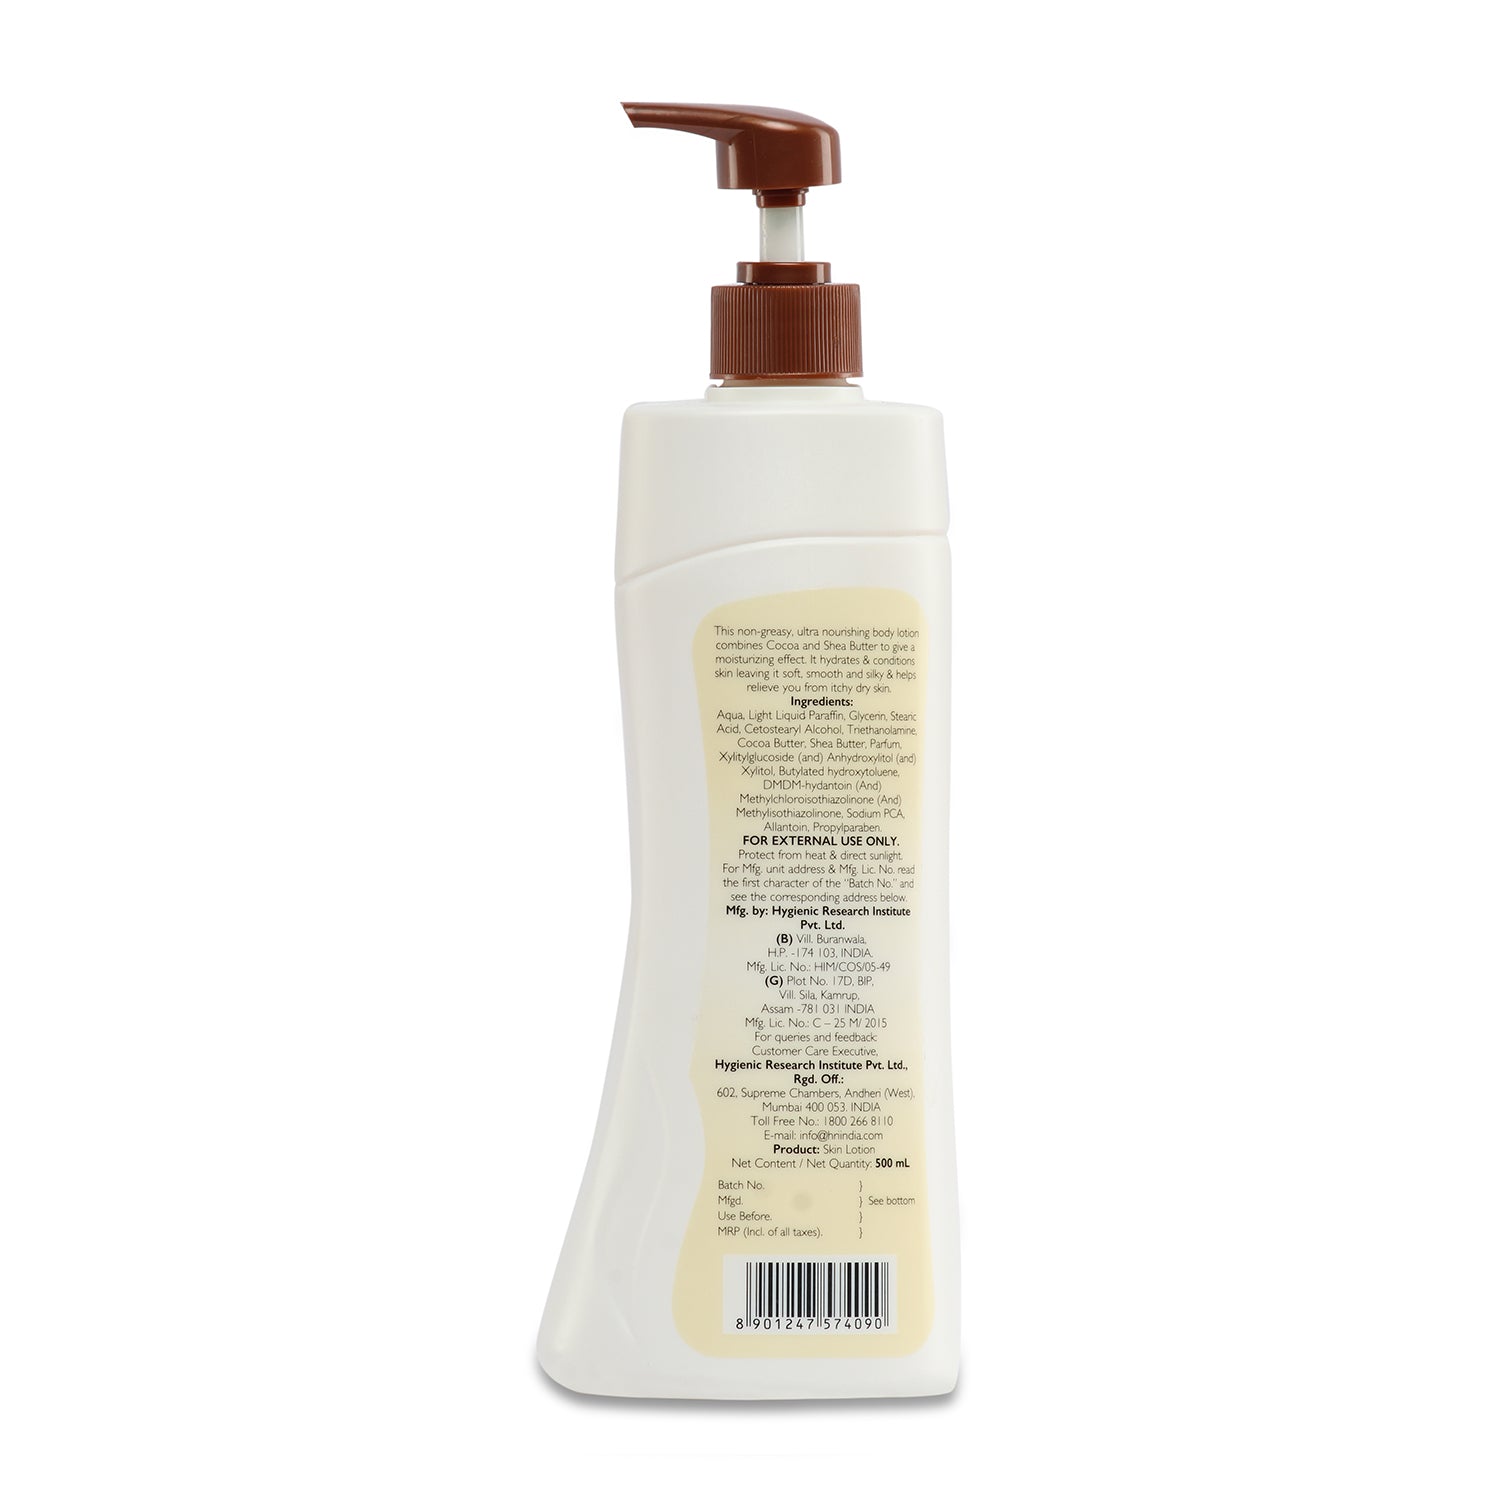 Florozone Deep Moisturizing Lotion With Cocoa Butter & Shea Butter